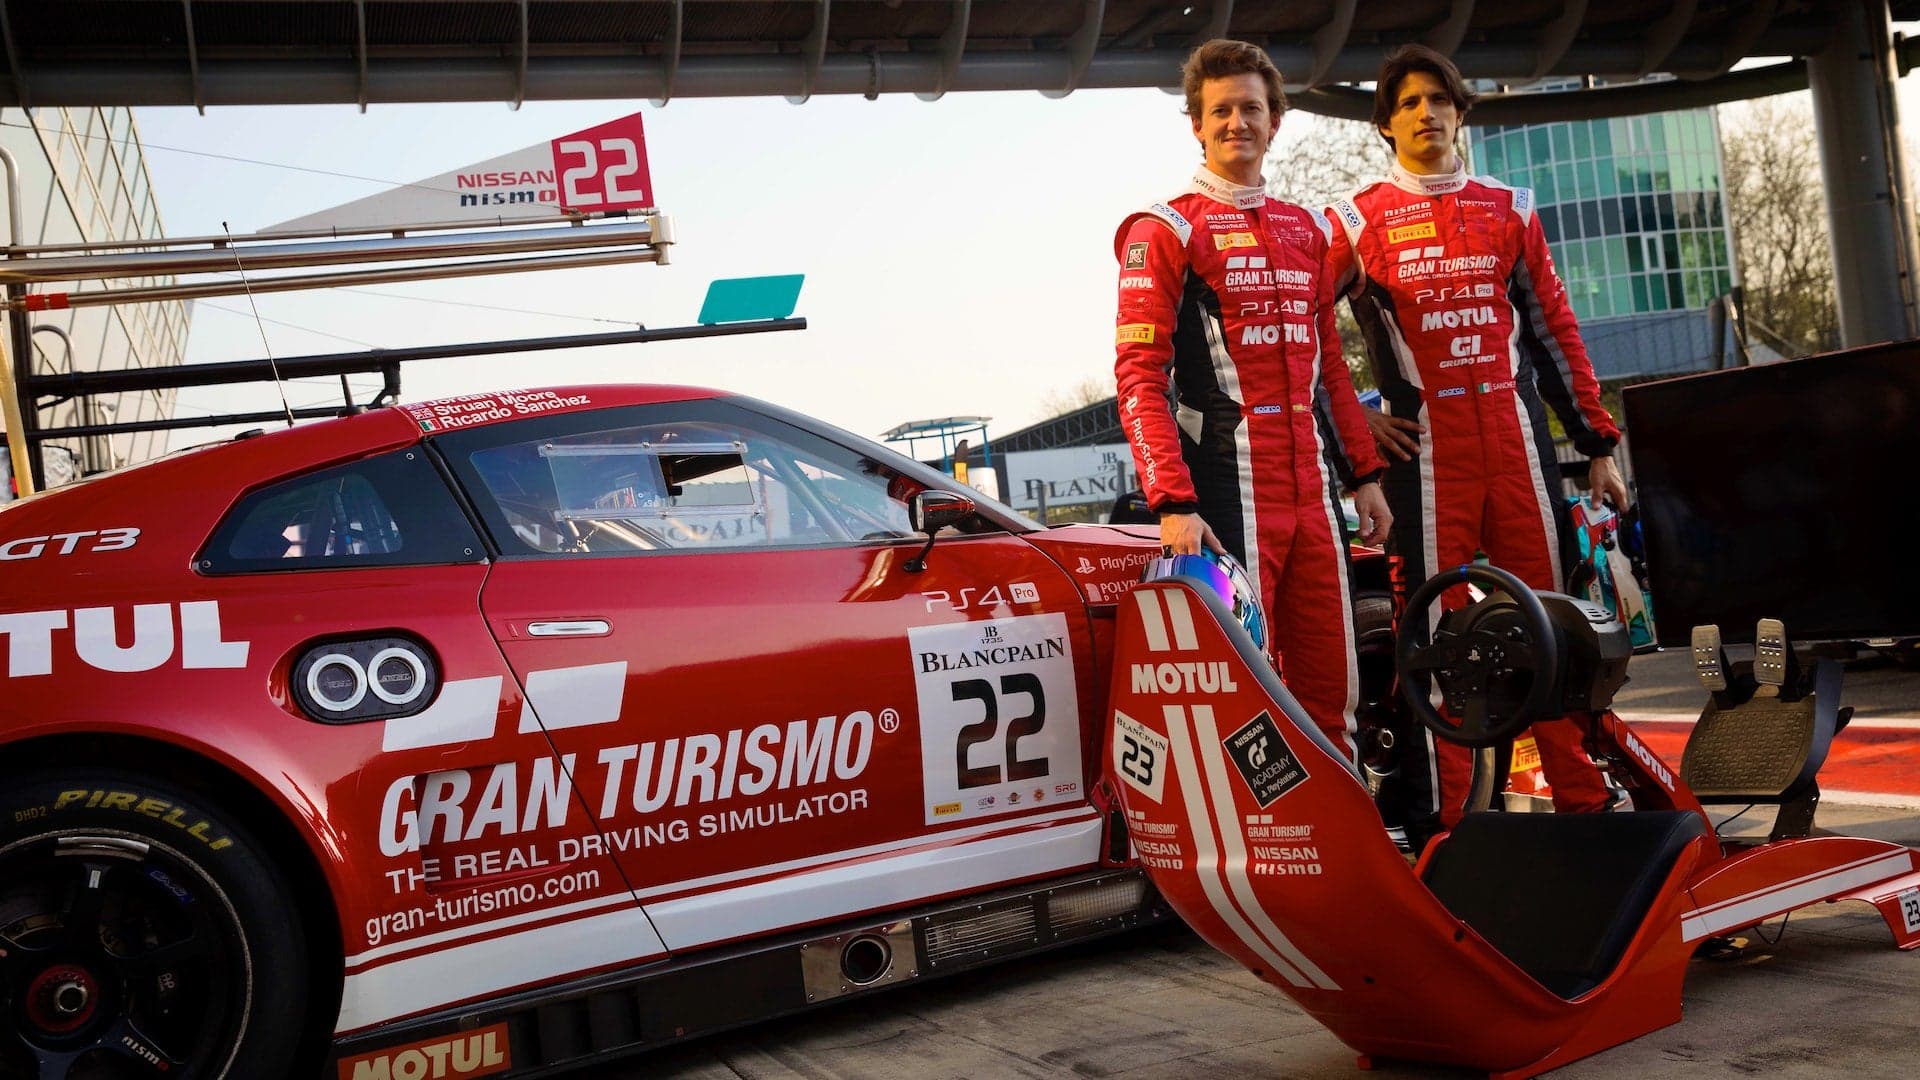 Nissan and Gran Turismo on Hunt for Top Driving, Gaming Talent